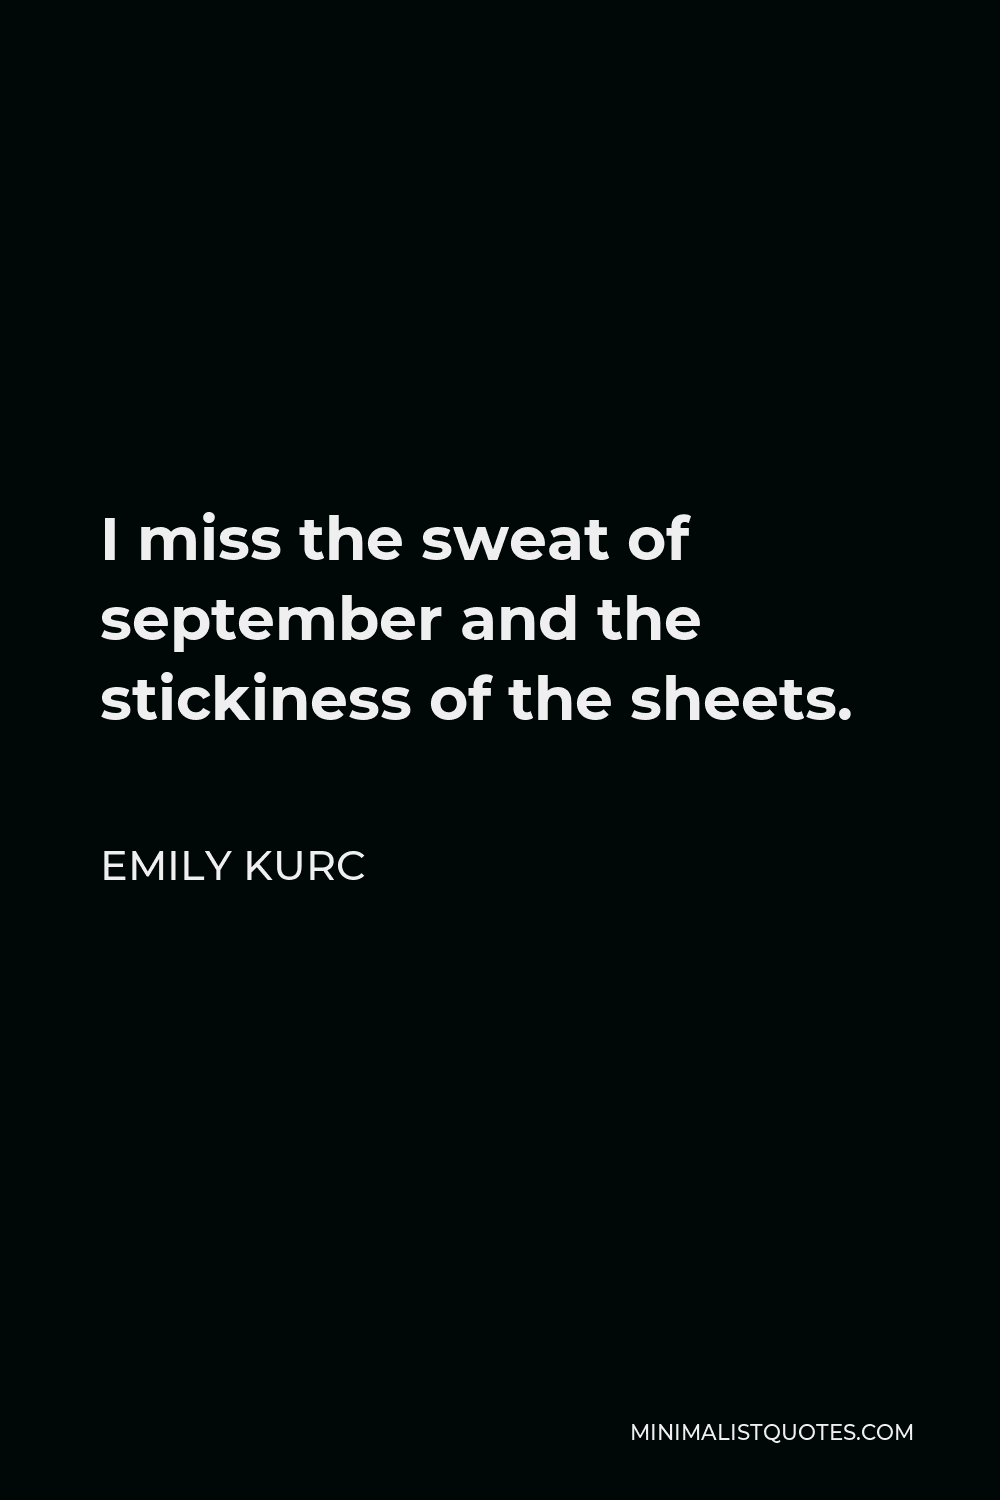 Emily Kurc Quote - I miss the sweat of september and the stickiness of the sheets.